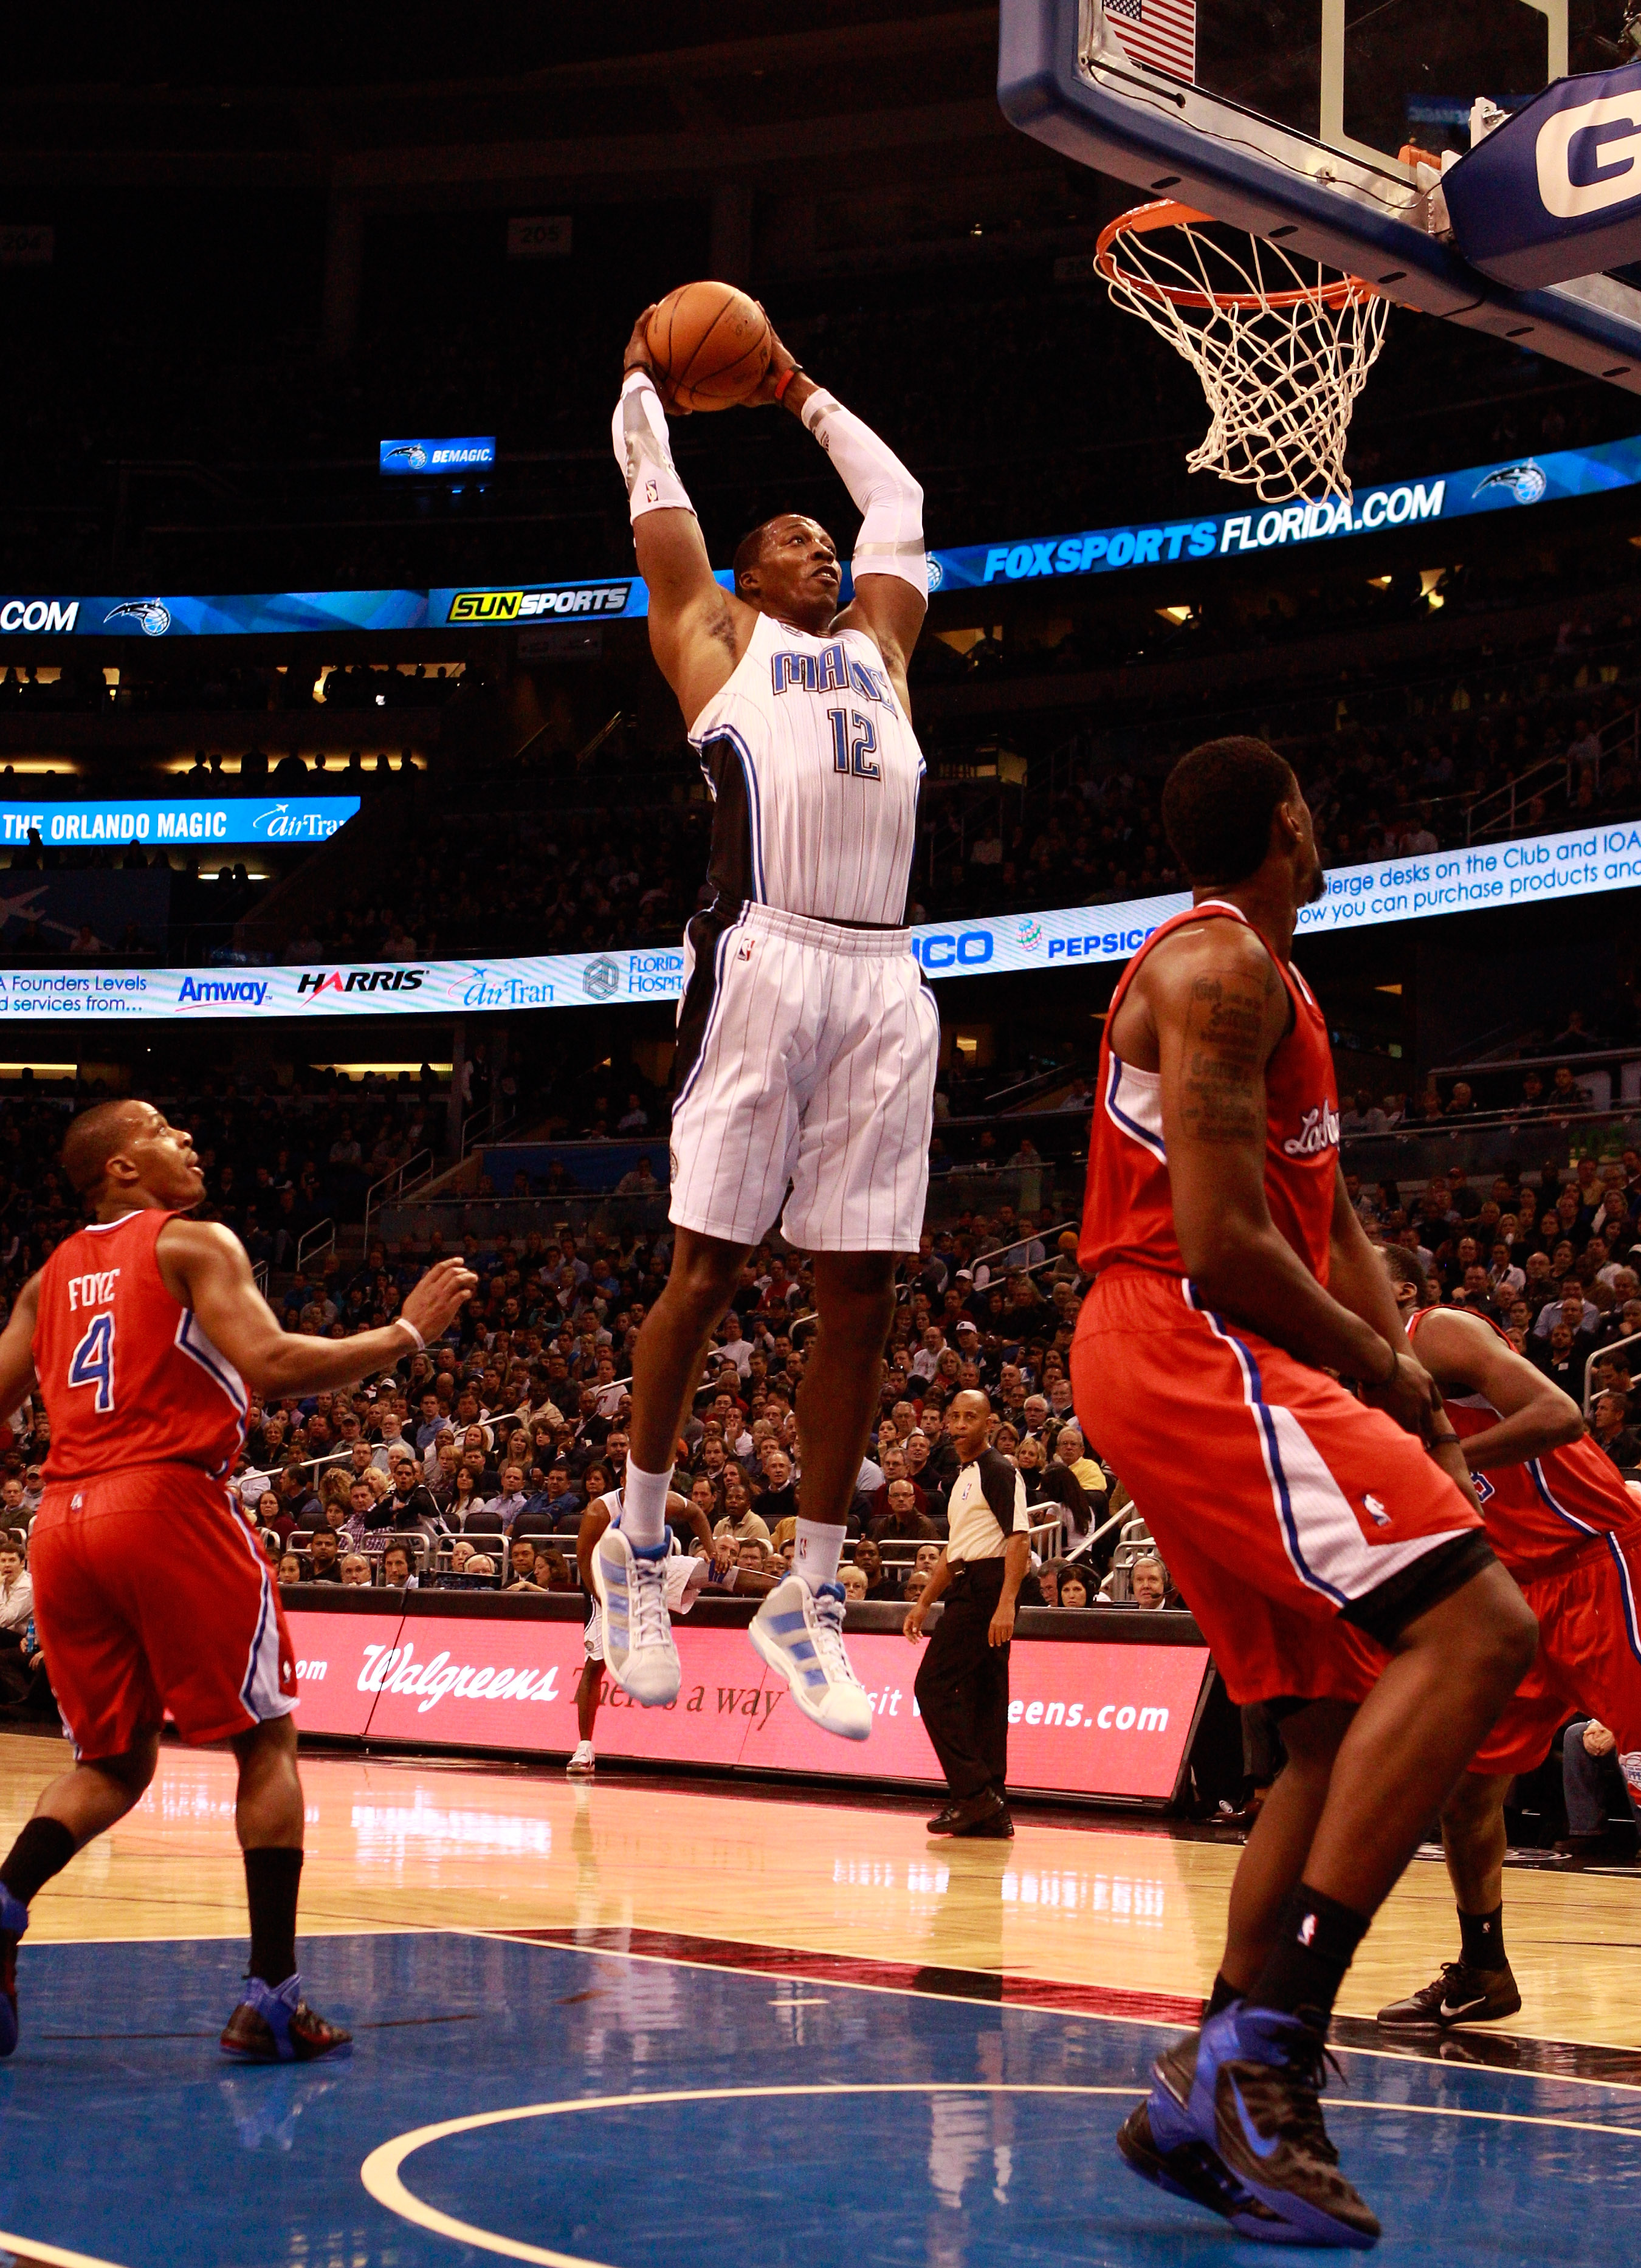 ORLANDO, FL - FEBRUARY 08:  Dwight Howard #12 of the Orlando Magic attempts a shot during a game against the Los Angeles Clippers at Amway Arena on February 8, 2011 in Orlando, Florida.  NOTE TO USER: User expressly acknowledges and agrees that, by downlo